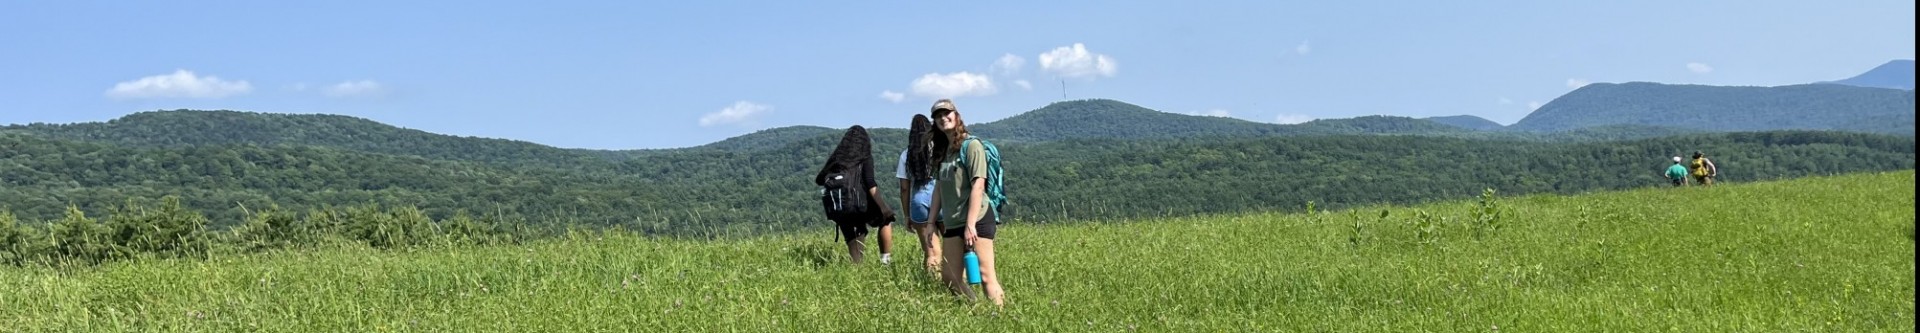 Students hiking the Green Mountains 